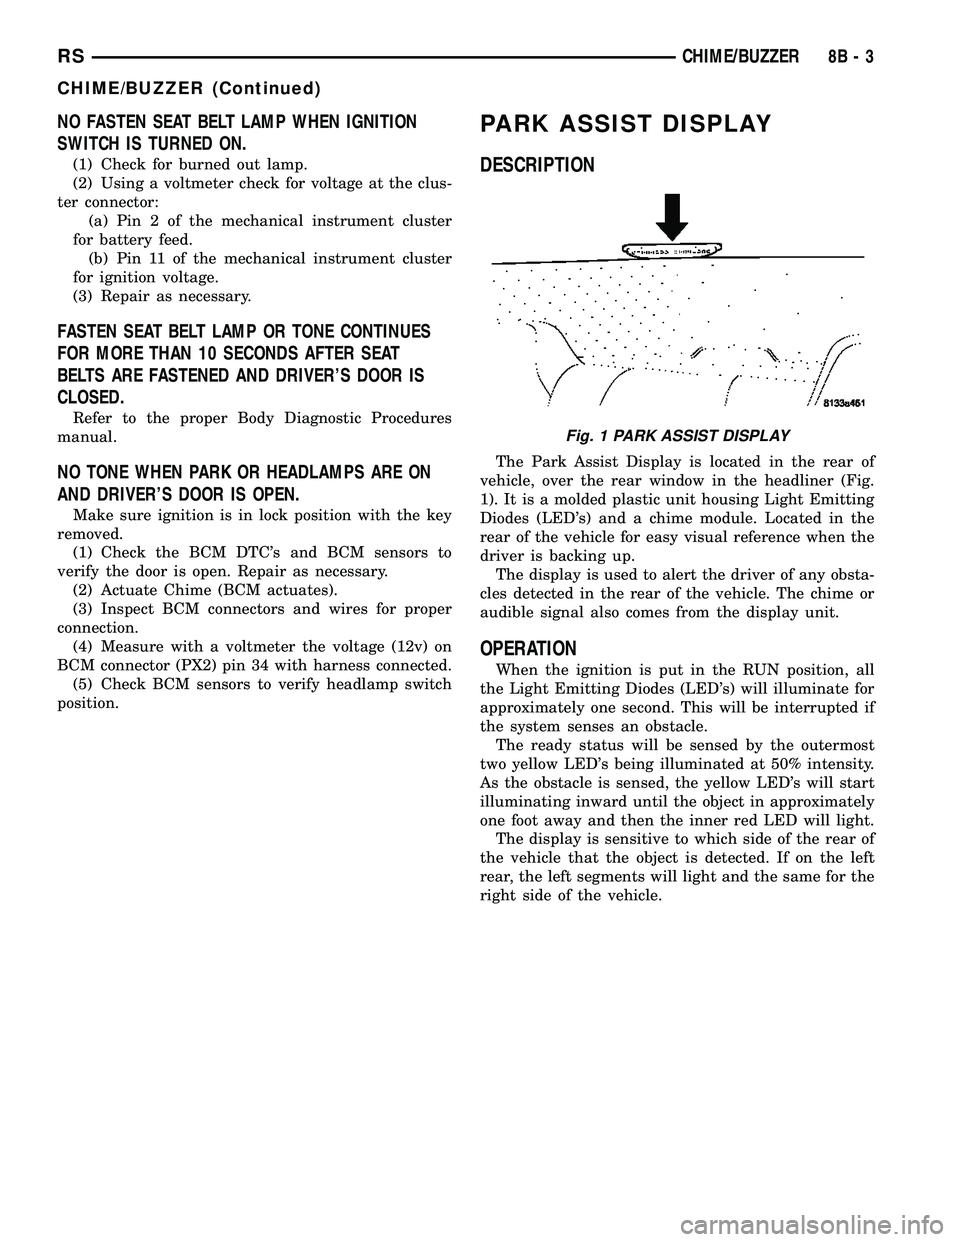 CHRYSLER CARAVAN 2005  Service Manual NO FASTEN SEAT BELT LAMP WHEN IGNITION
SWITCH IS TURNED ON.
(1) Check for burned out lamp.
(2) Using a voltmeter check for voltage at the clus-
ter connector:
(a) Pin 2 of the mechanical instrument cl